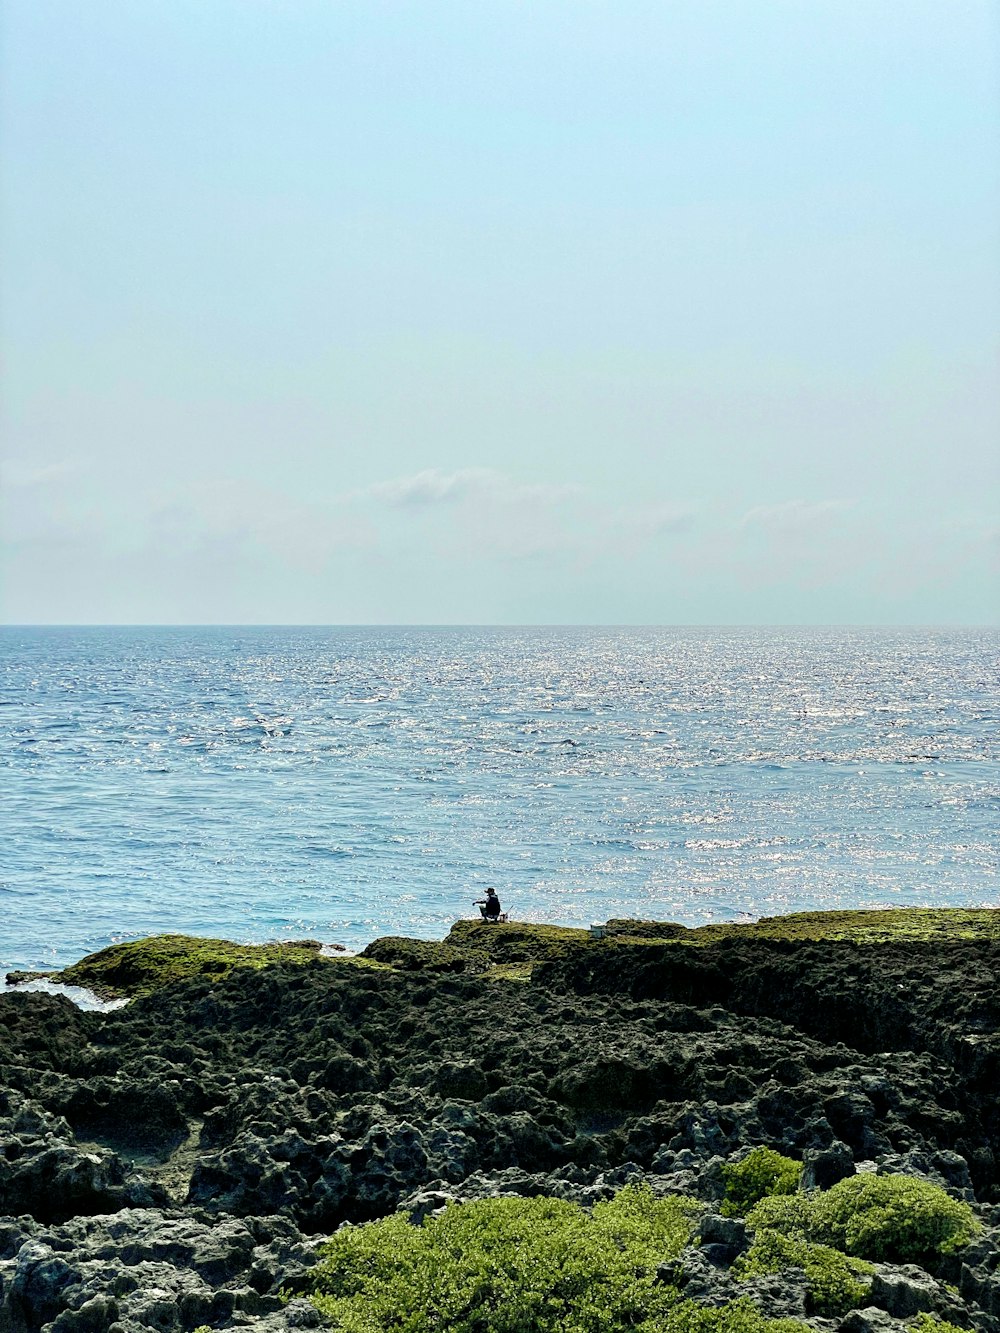 a person sitting on a rock near the ocean